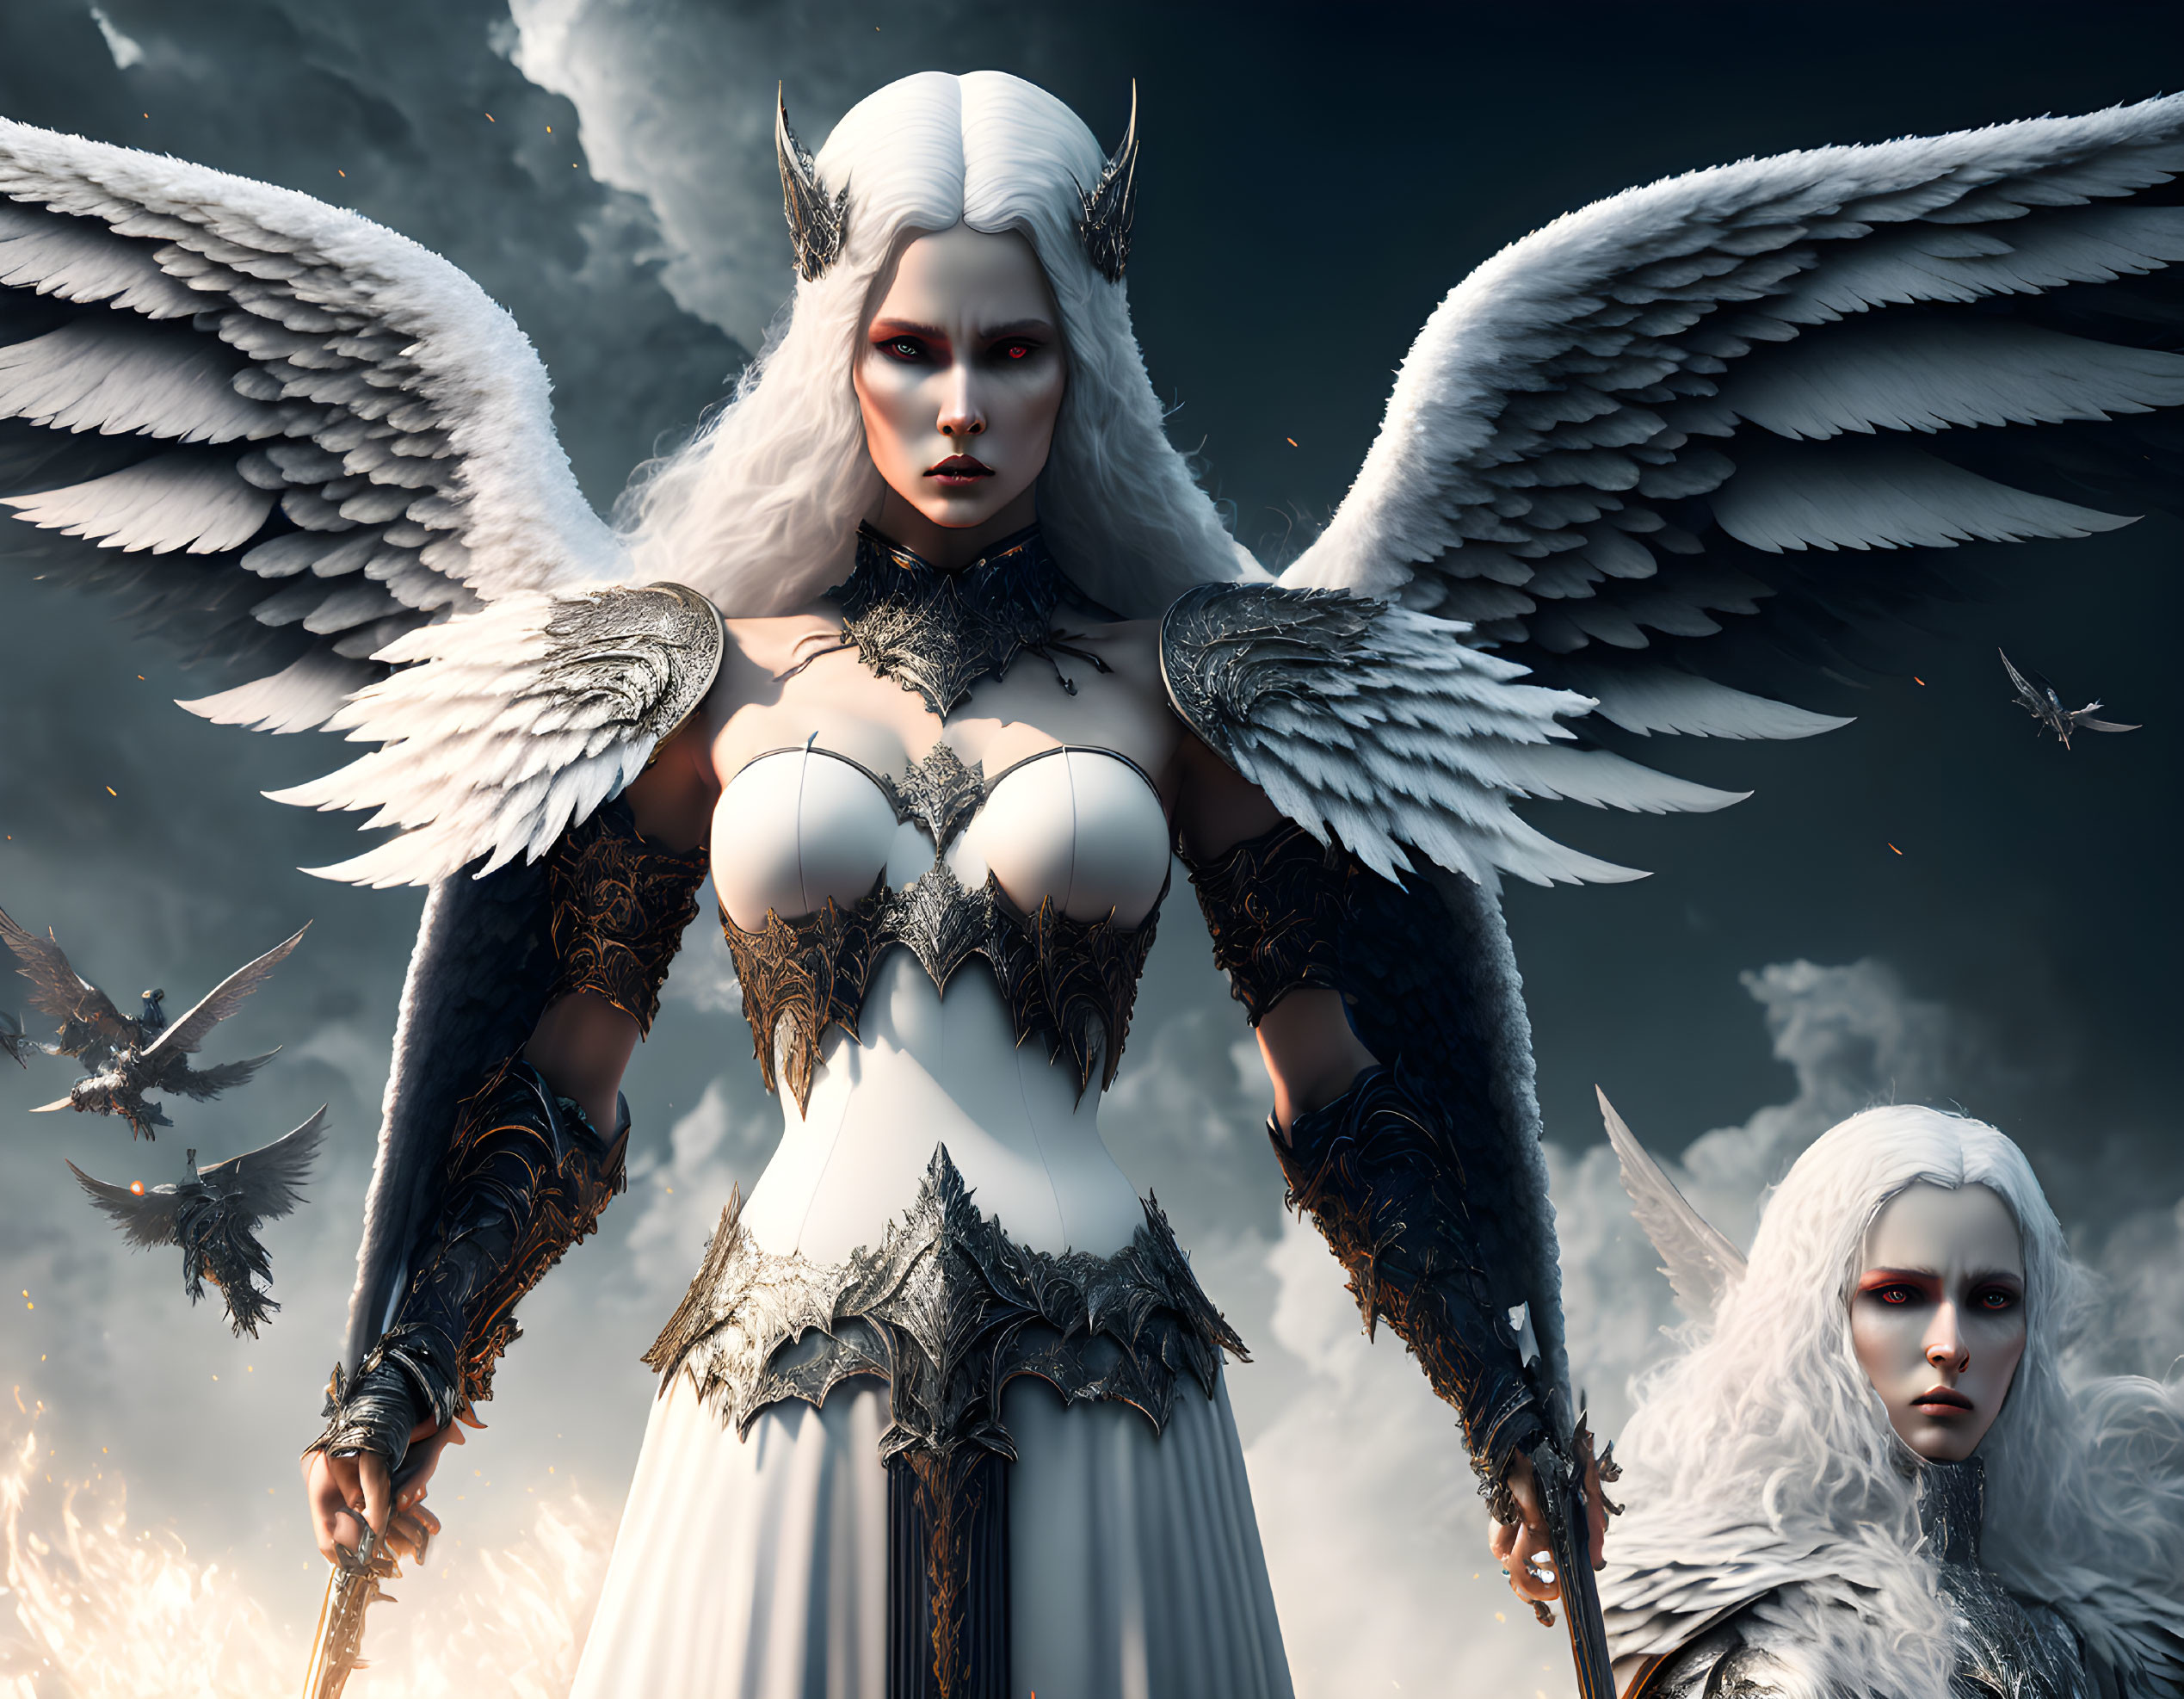 Digital Art: Ethereal Female Figures with White Wings and Ornate Armor